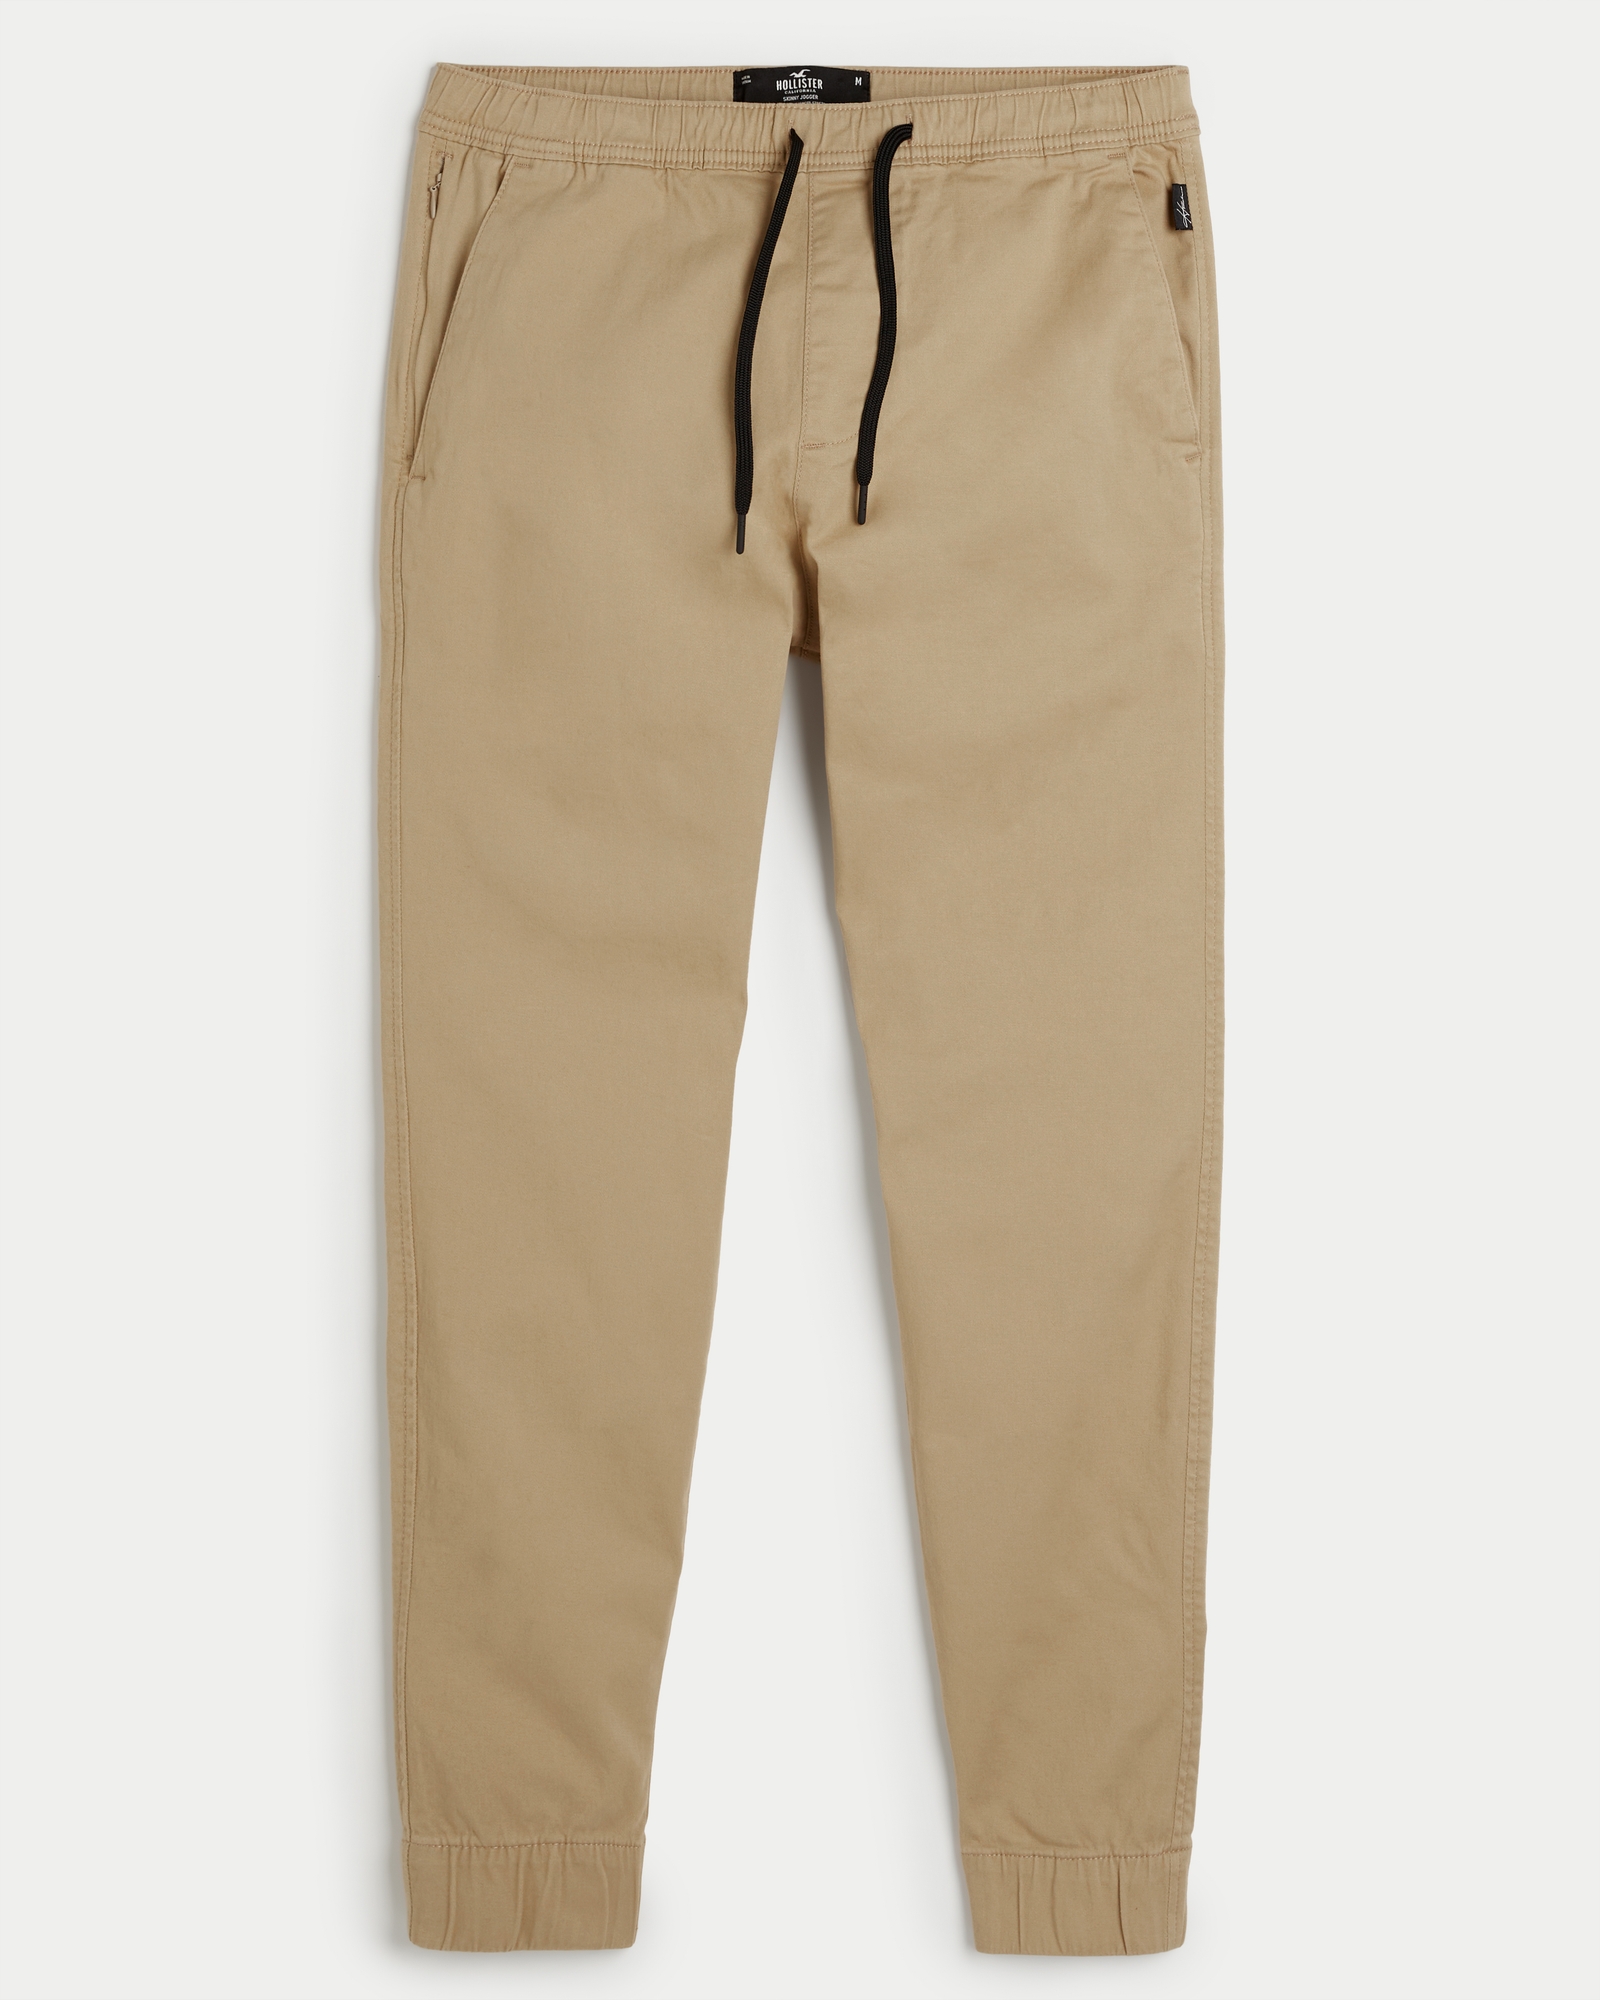 https://img.hollisterco.com/is/image/anf/KIC_330-1504-1117-475_prod1.jpg?policy=product-extra-large